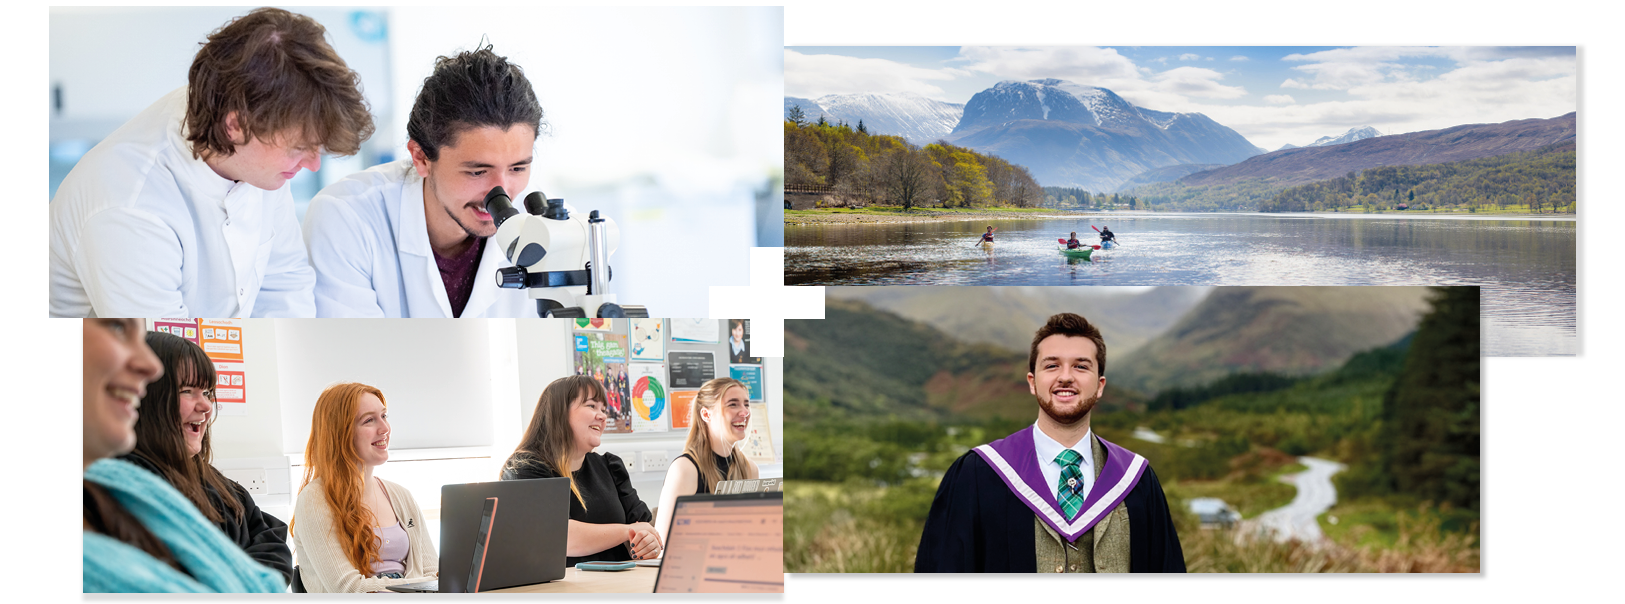 Collage of 4 | Students in a laboratory | Students kayaking | Students in a classroom | Student standing in a glen